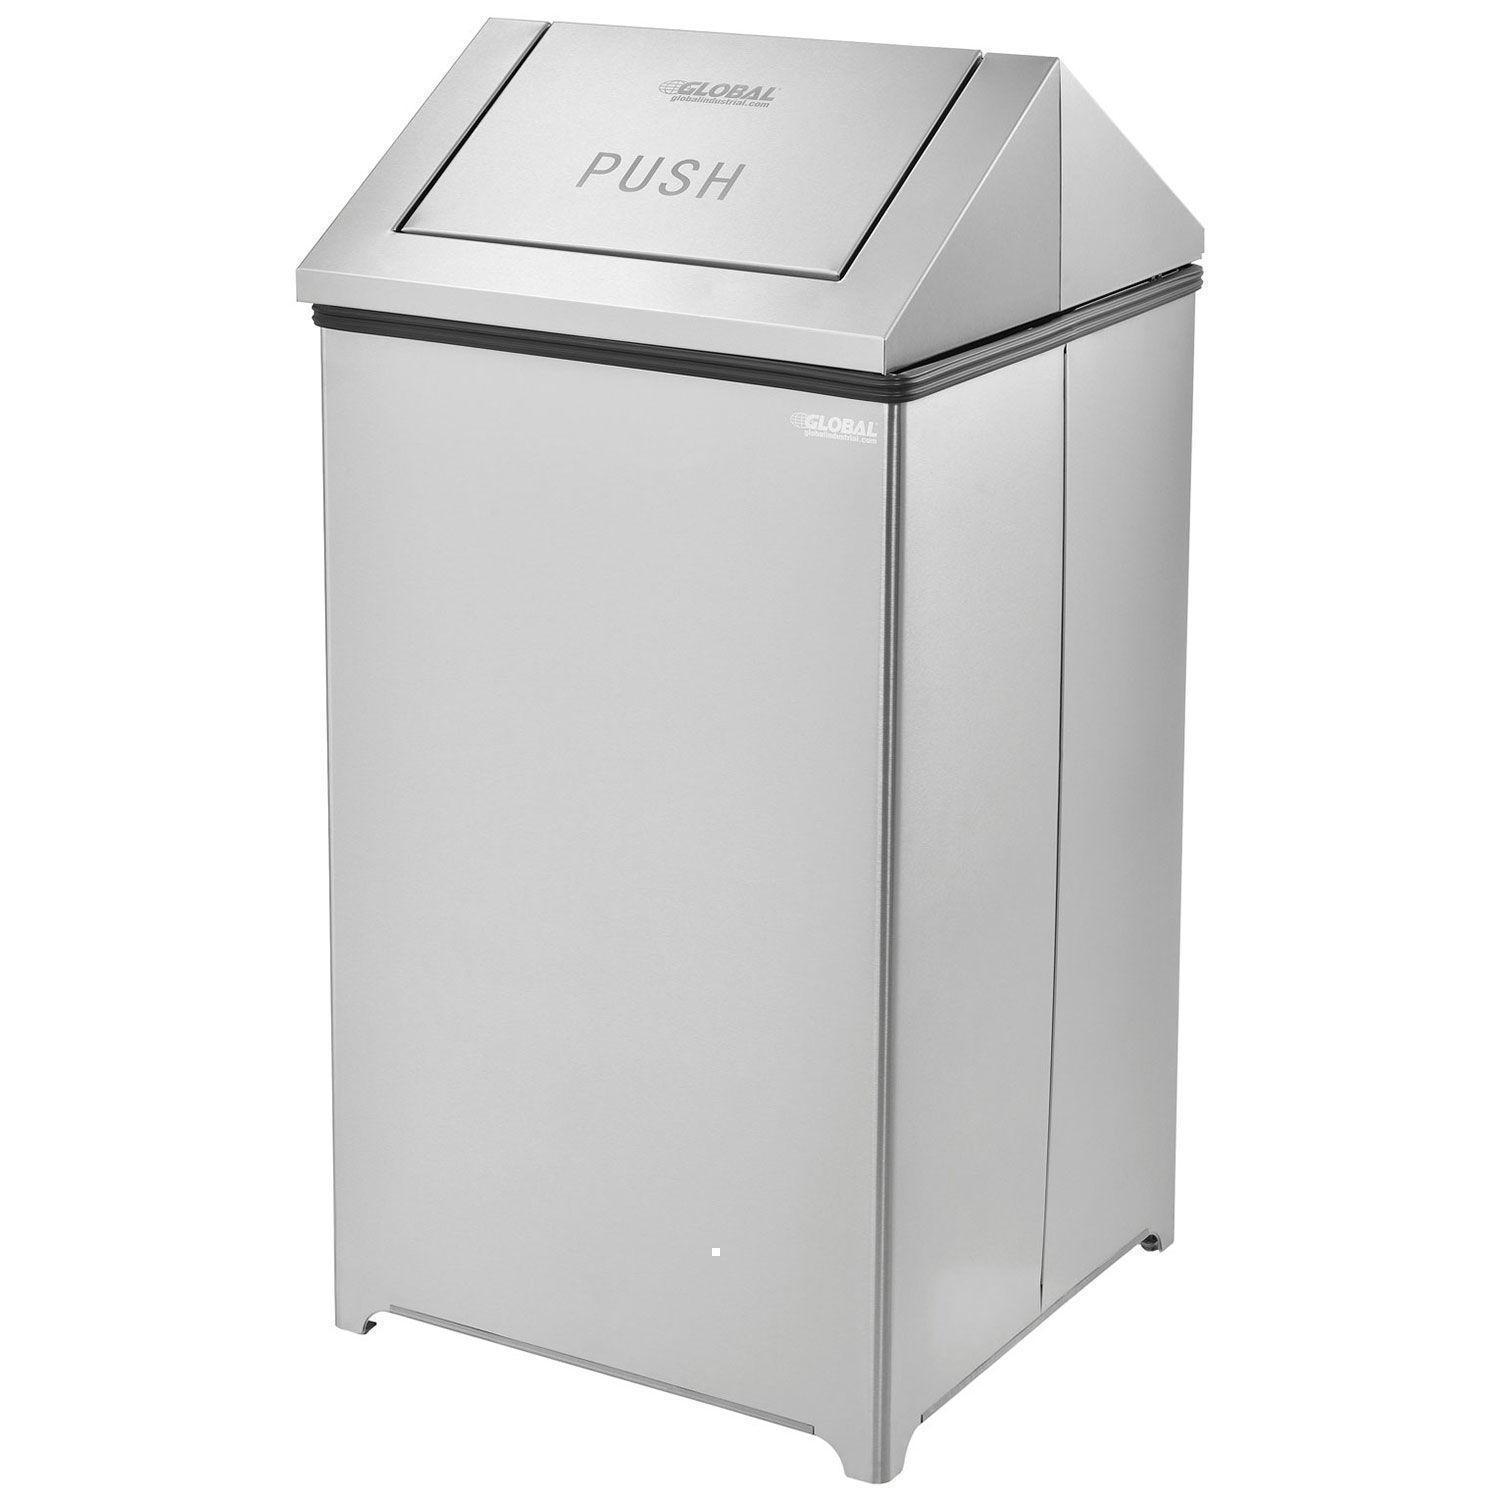 40 Gallon Stainless Steel Swing Top Receptacle Sale